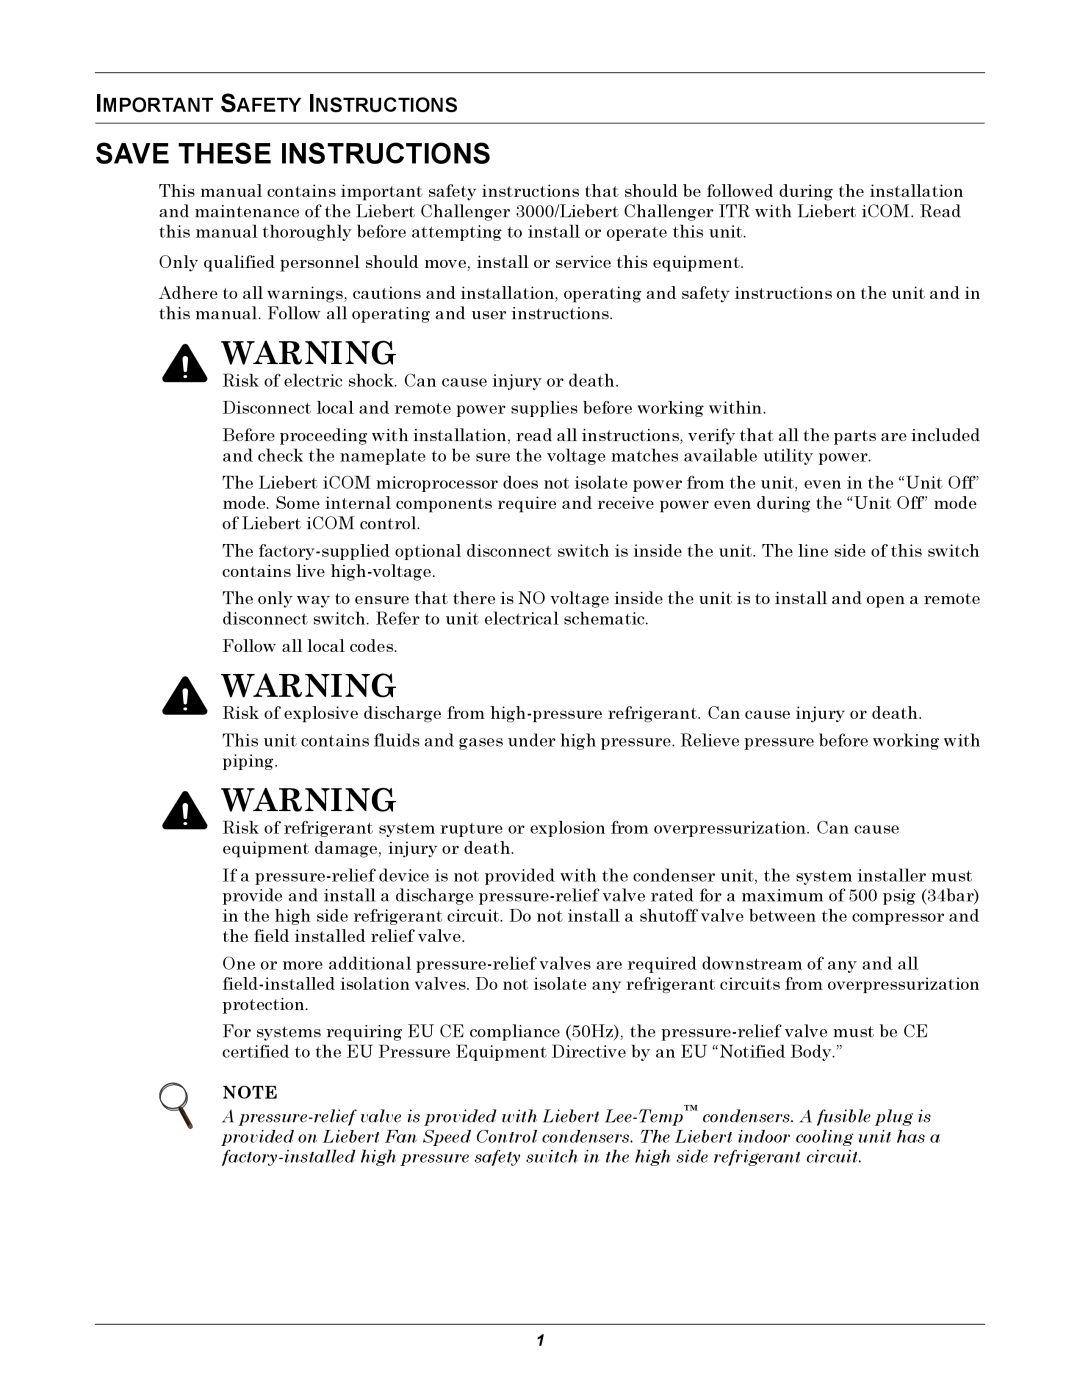 Emerson 3000/ITR manual Save These Instructions, Important Safety Instructions 